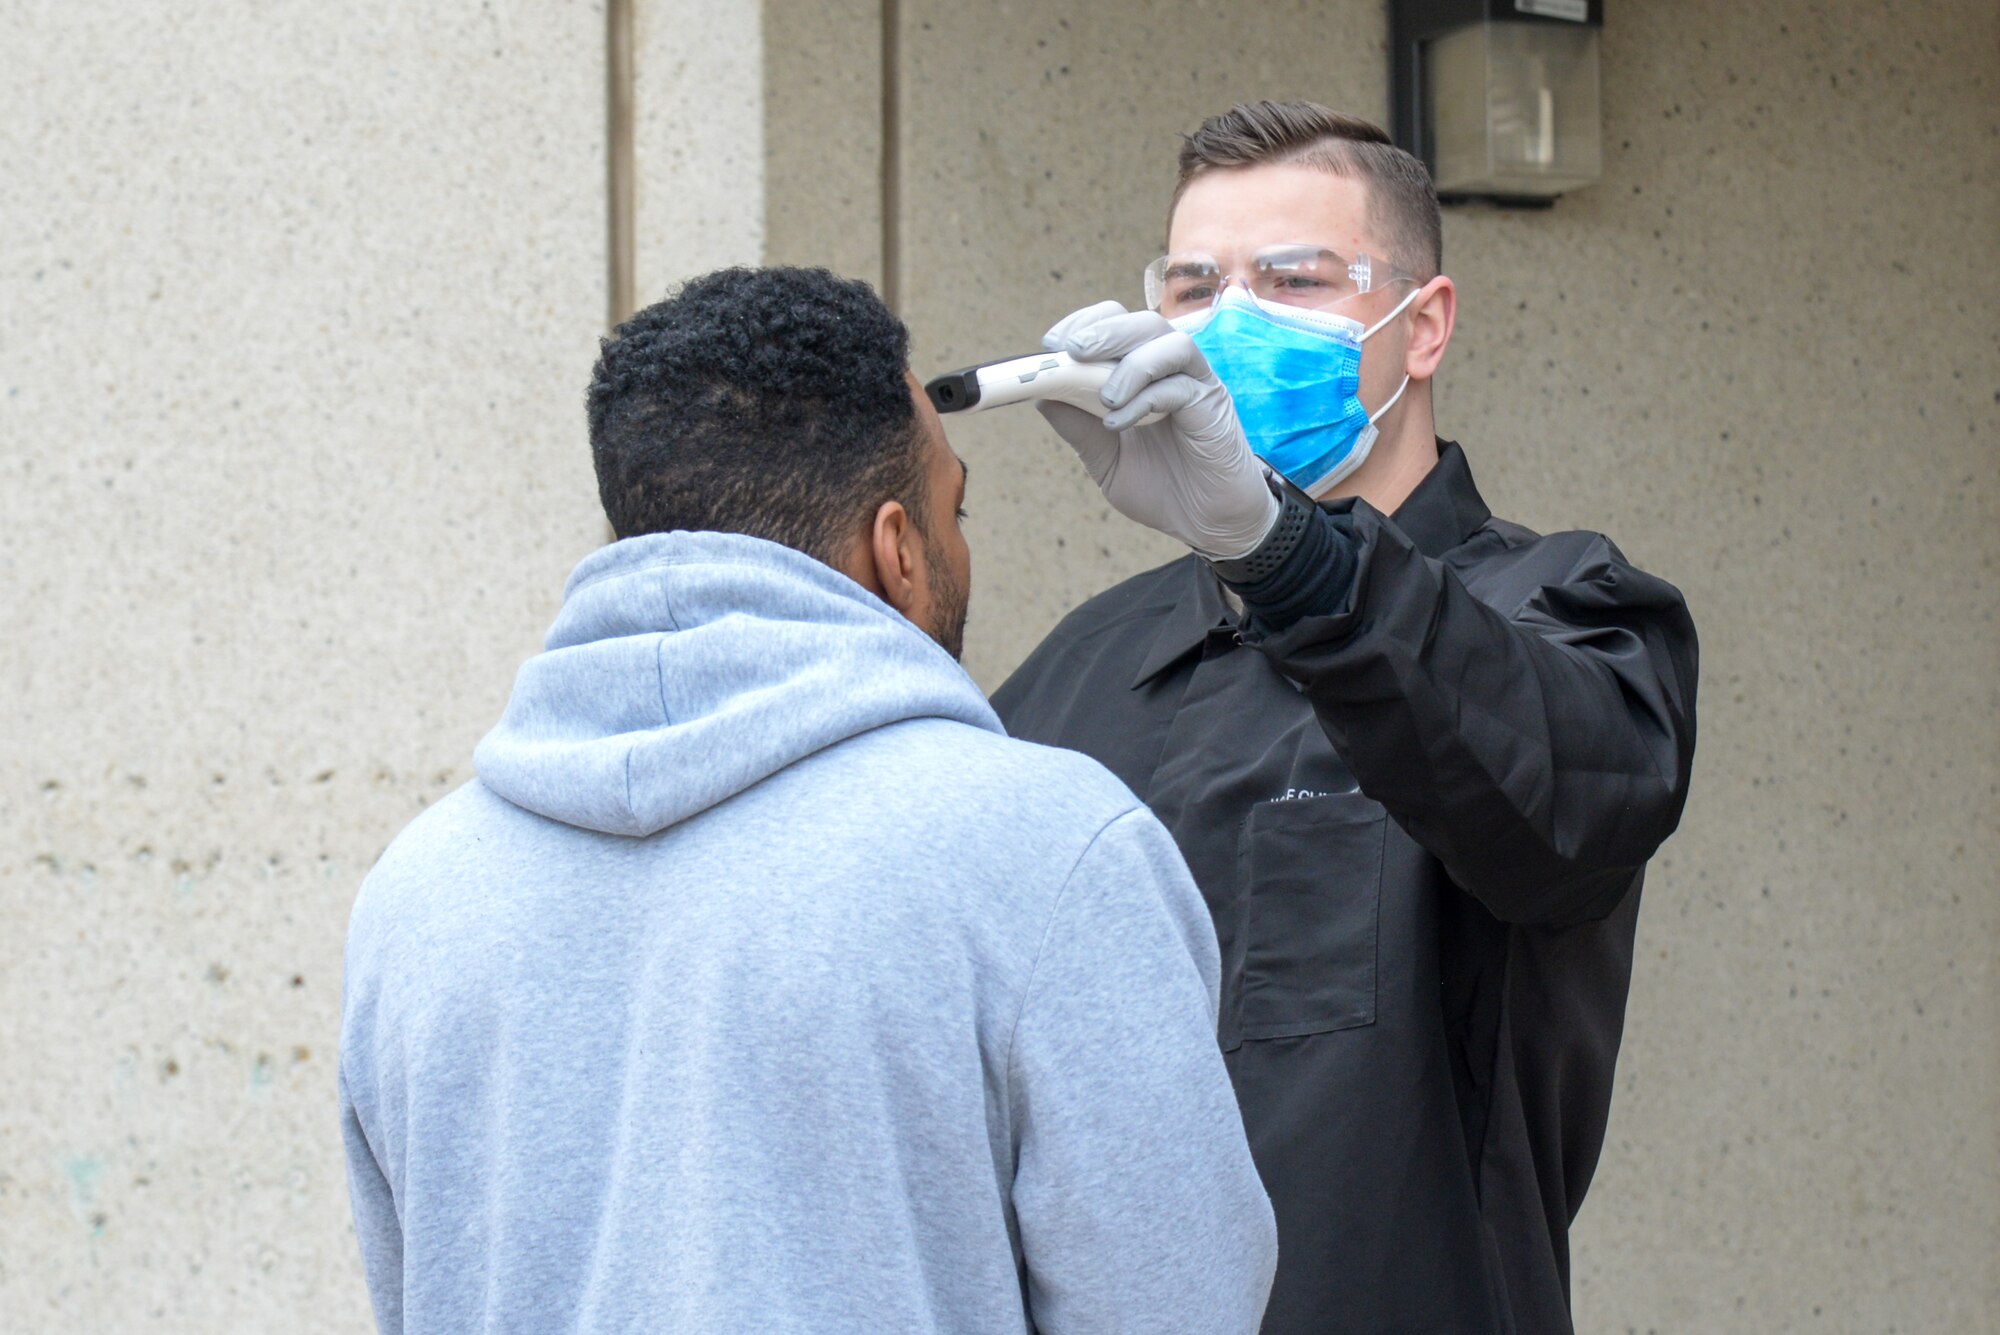 Airman 1st Class Kyle Larson, a medical technicial with 75th Medical Group, screens an incoming patient before entering the Hill Air Force Base, Utah medical clinic March 31, 2020.